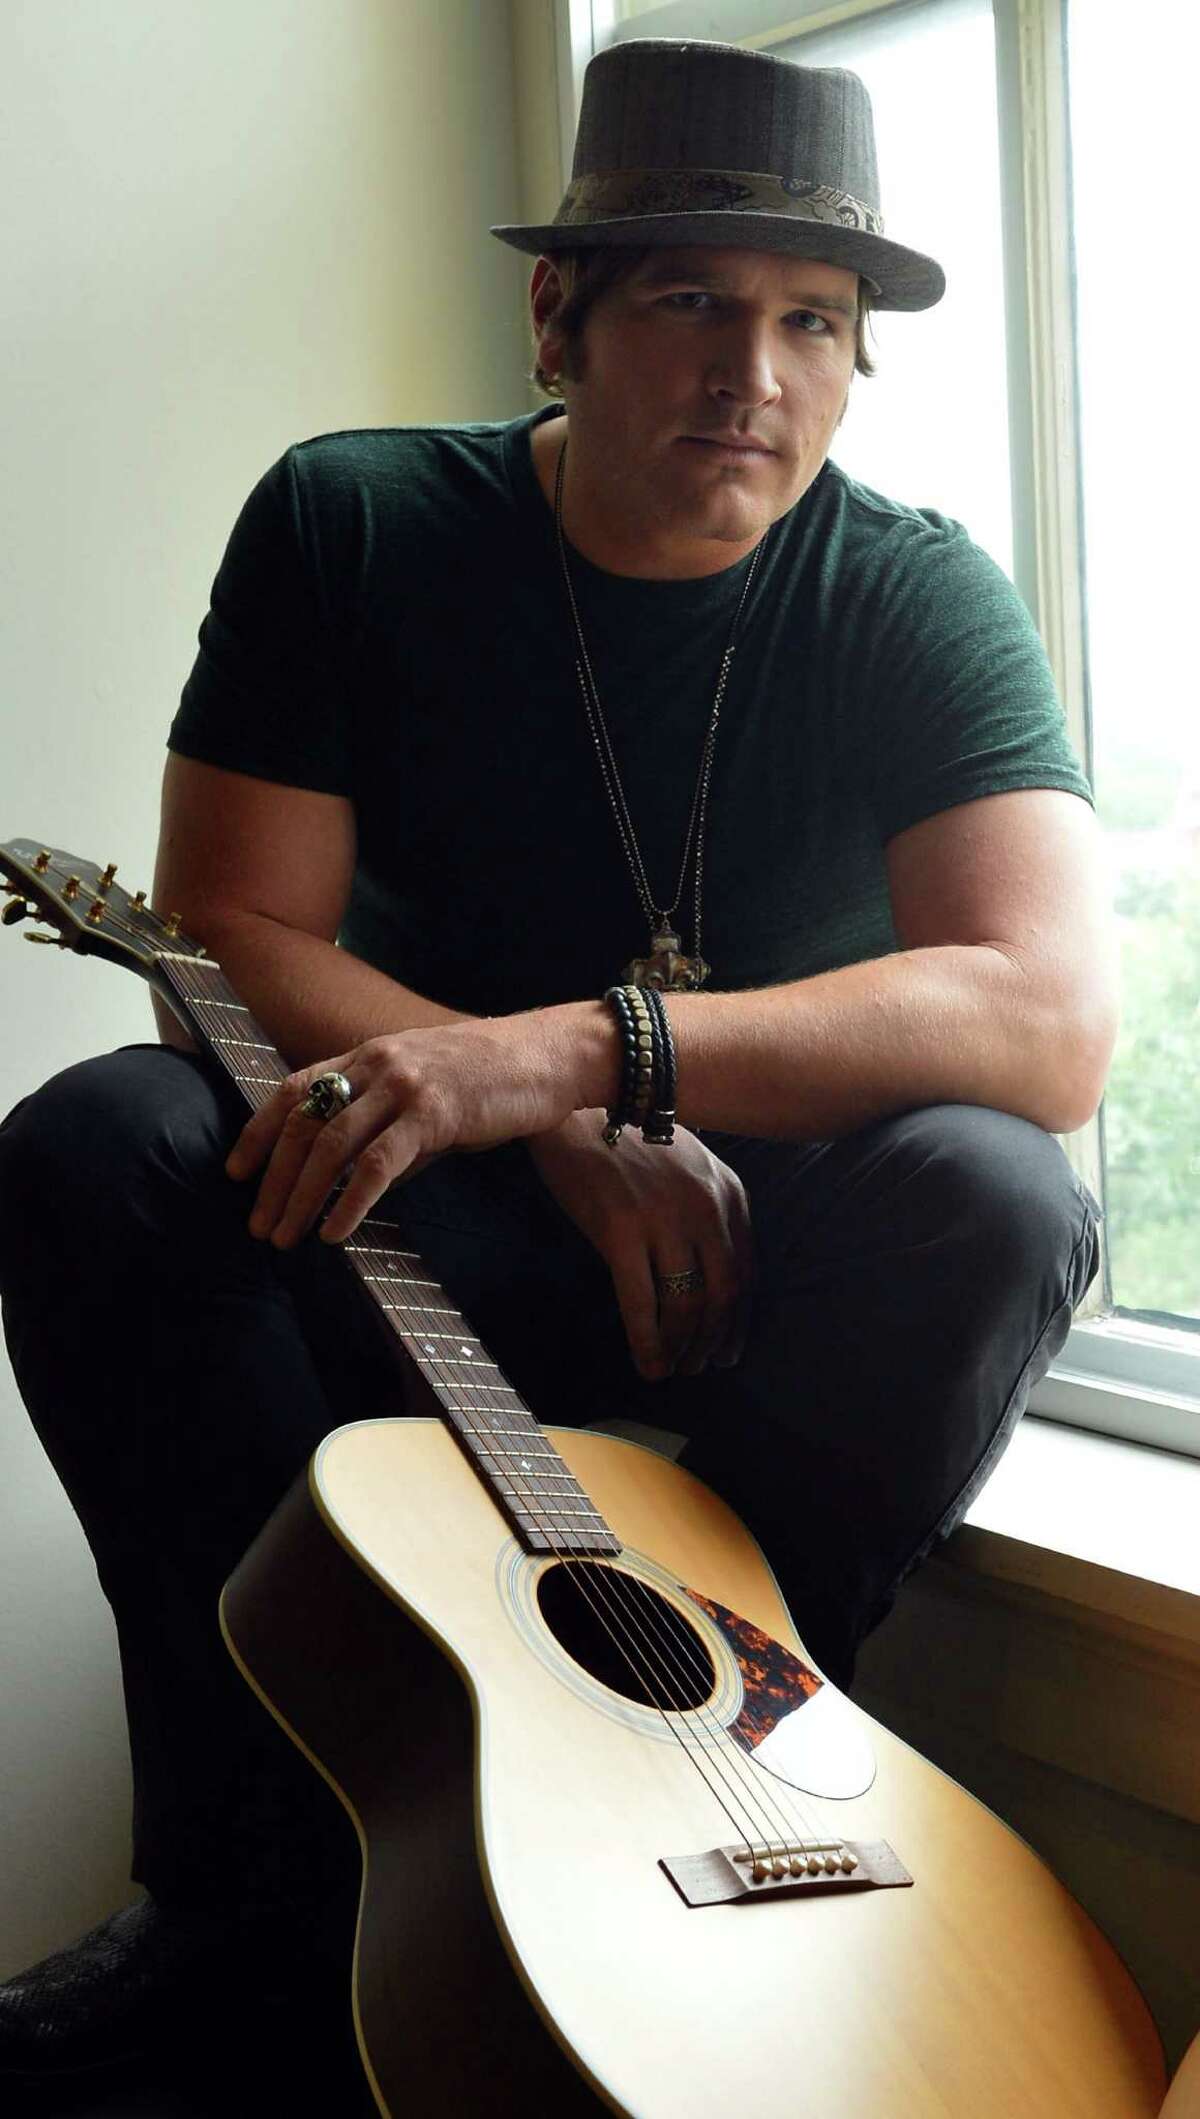 Singer/songwriter Jerrod Niemann will play on Saturday at Blue Bonnet Palace.